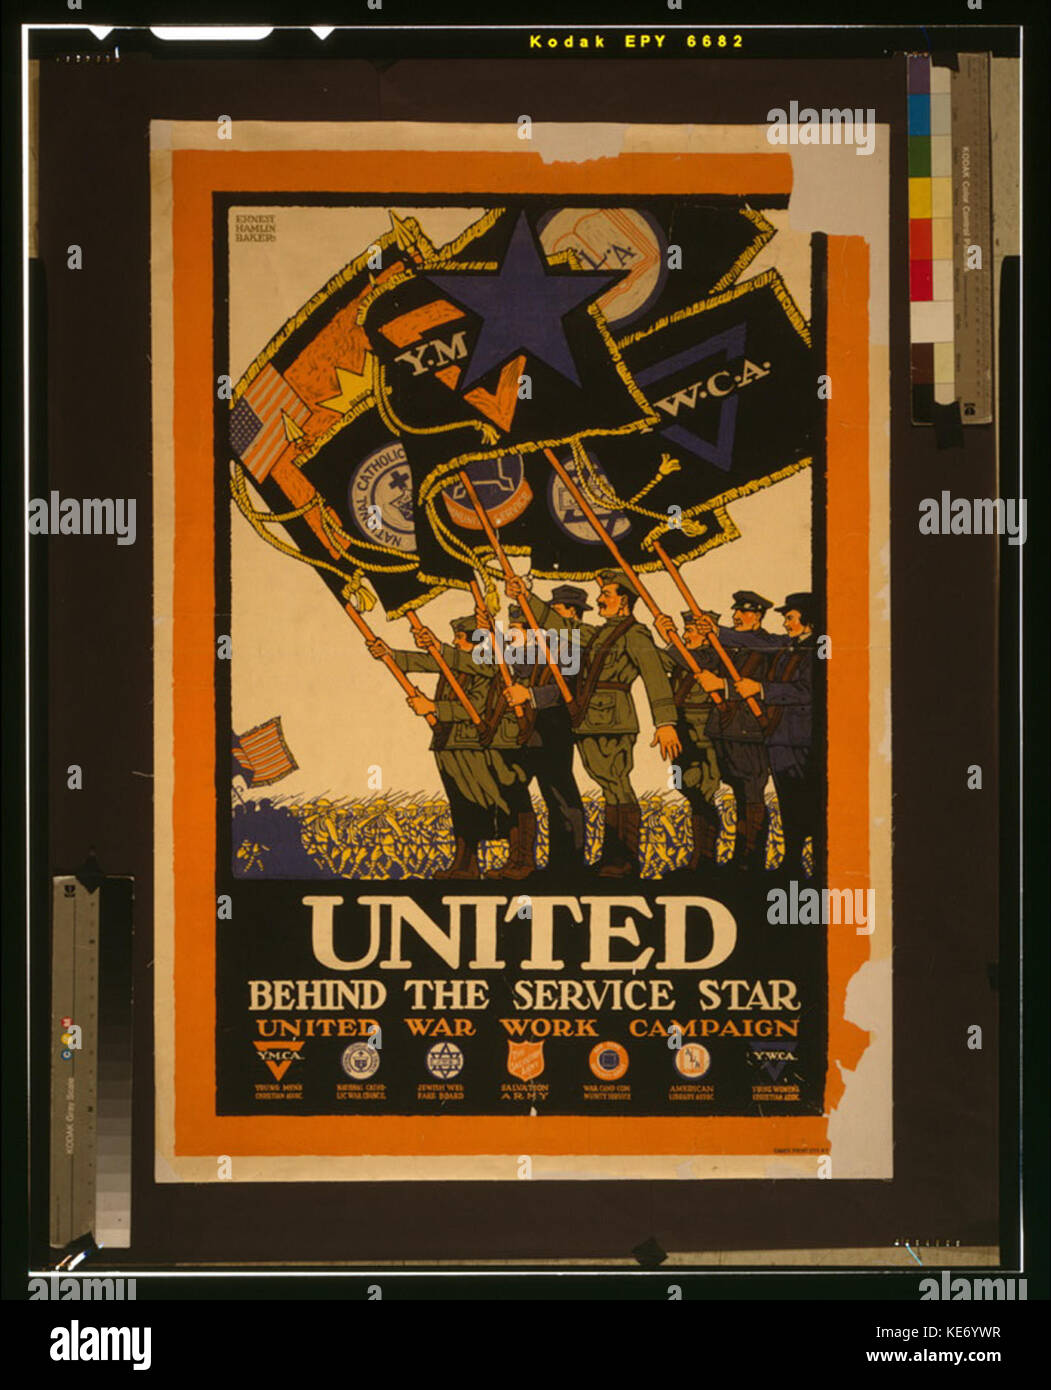 United behind the service star, United War Work Campaign LCCN2002699394 Stock Photo